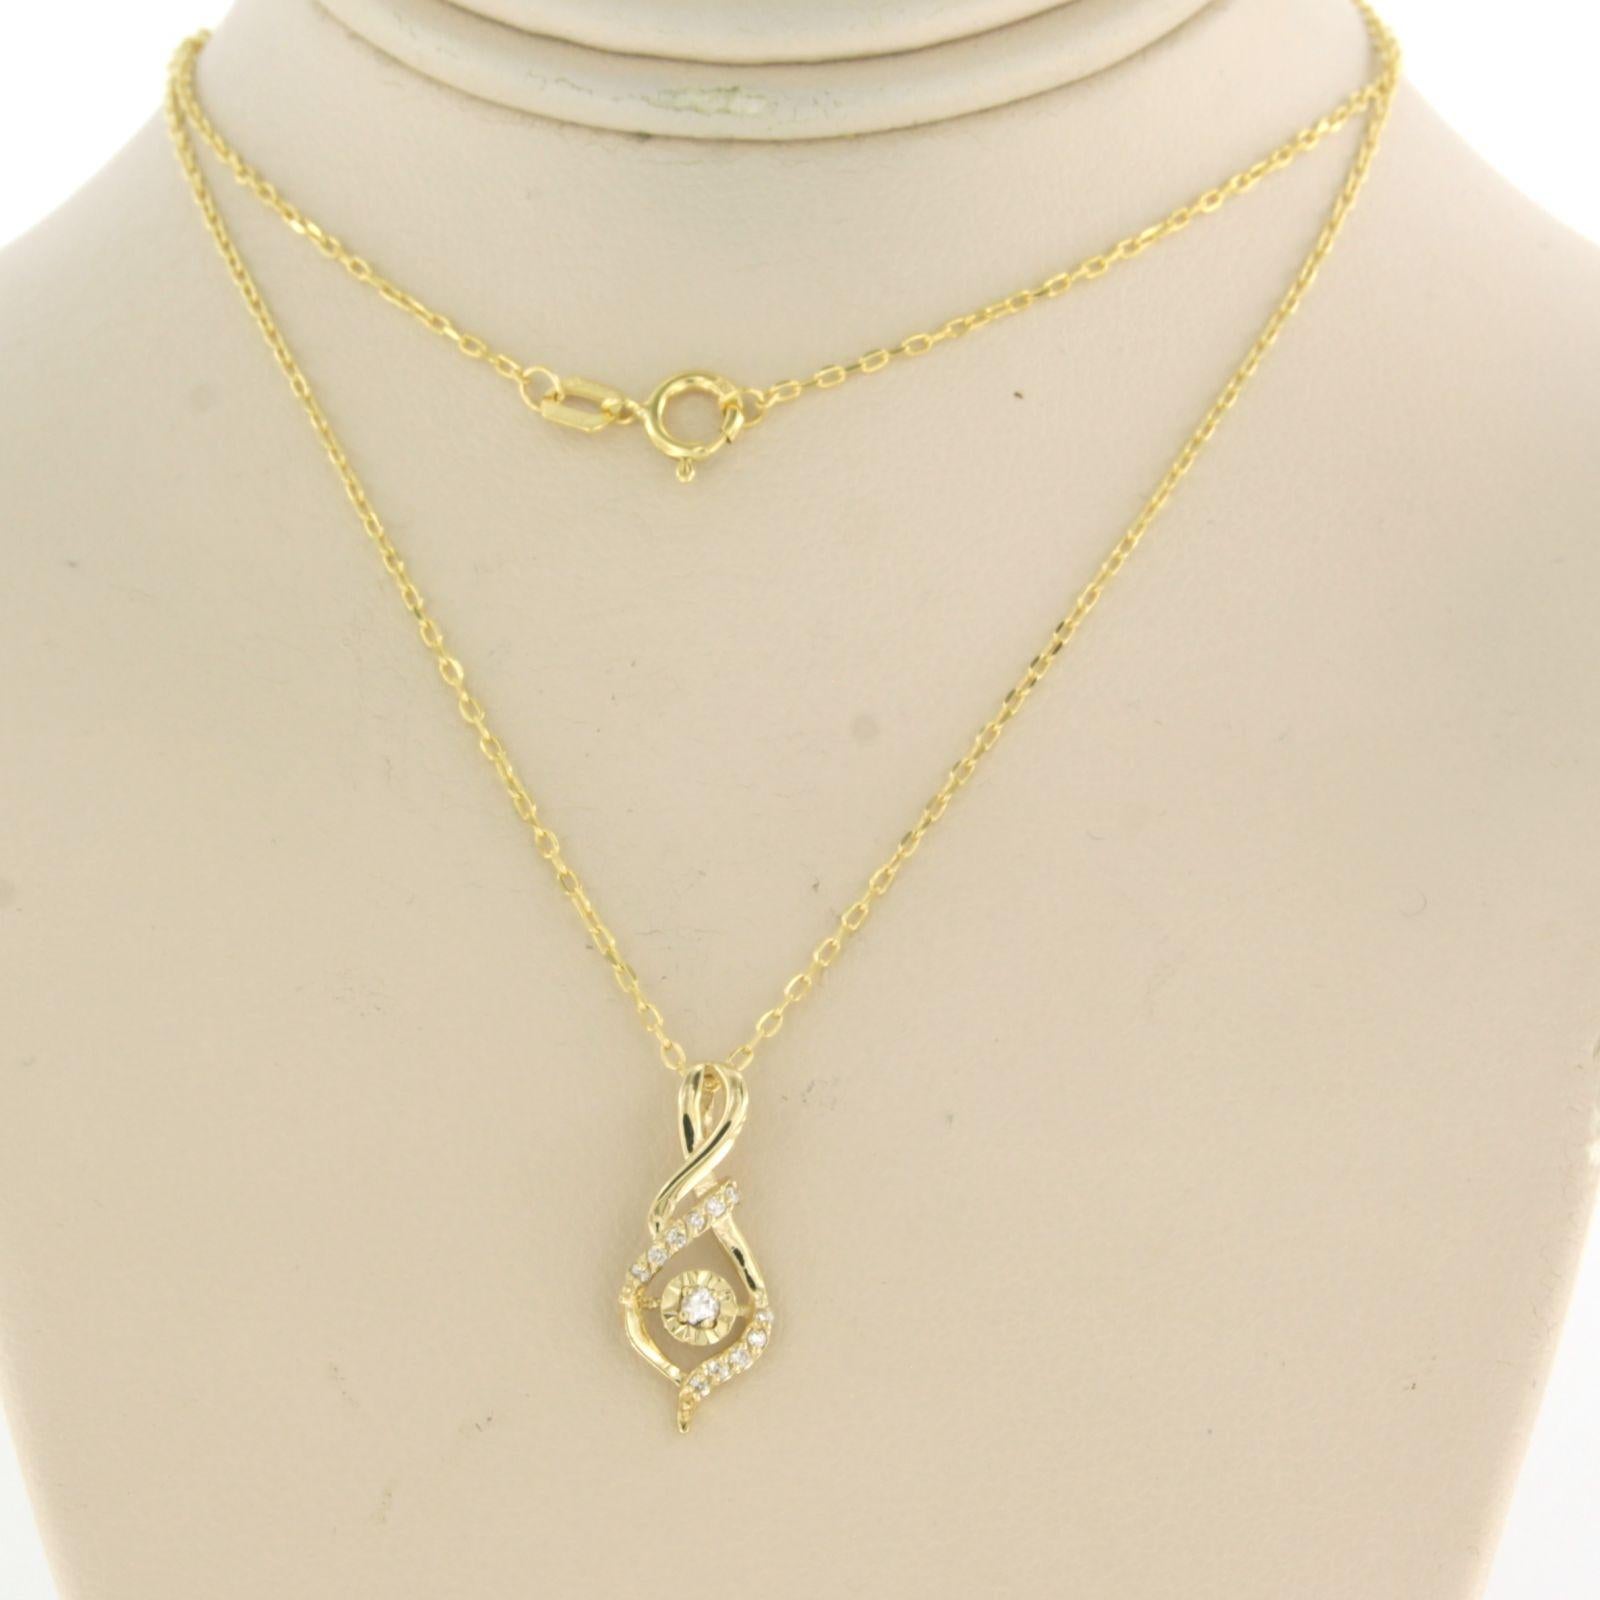 14k yellow gold necklace with a pendant set with brilliant cut diamonds. 0.07ct - F/G - VS/SI - 45cm long

detailed description:

necklace is 45 cm long and 0.7 mm wide

Dimensions of the pendant are 1.8 cm long by 7.2 mm wide

total weight: 1.7